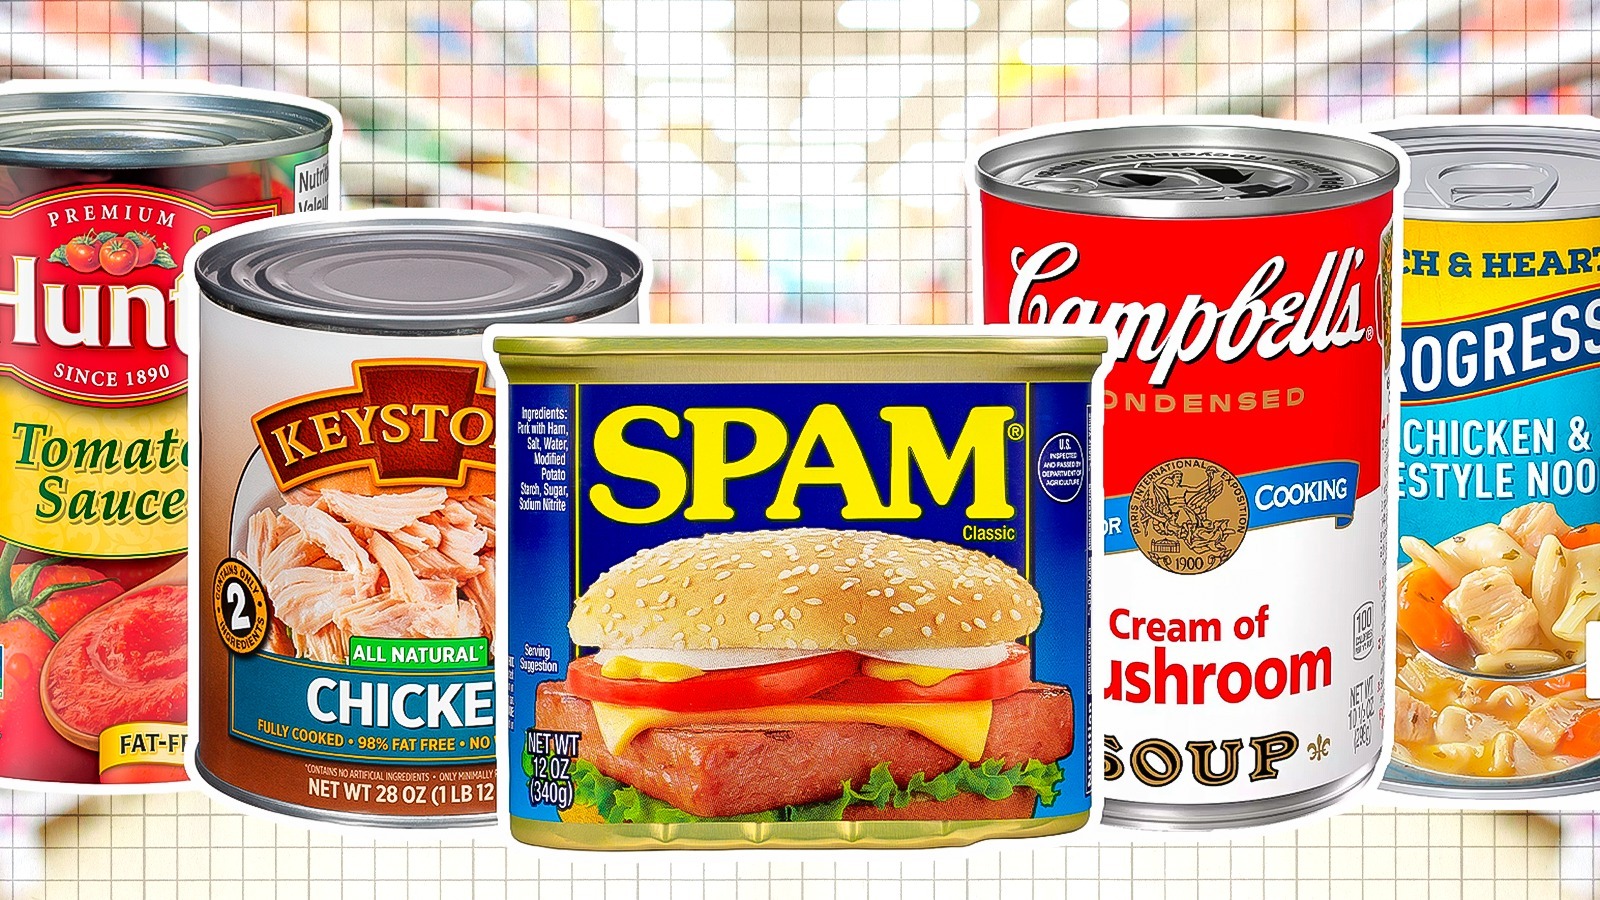 There Are More Flavors Of SPAM Than You Might Expect